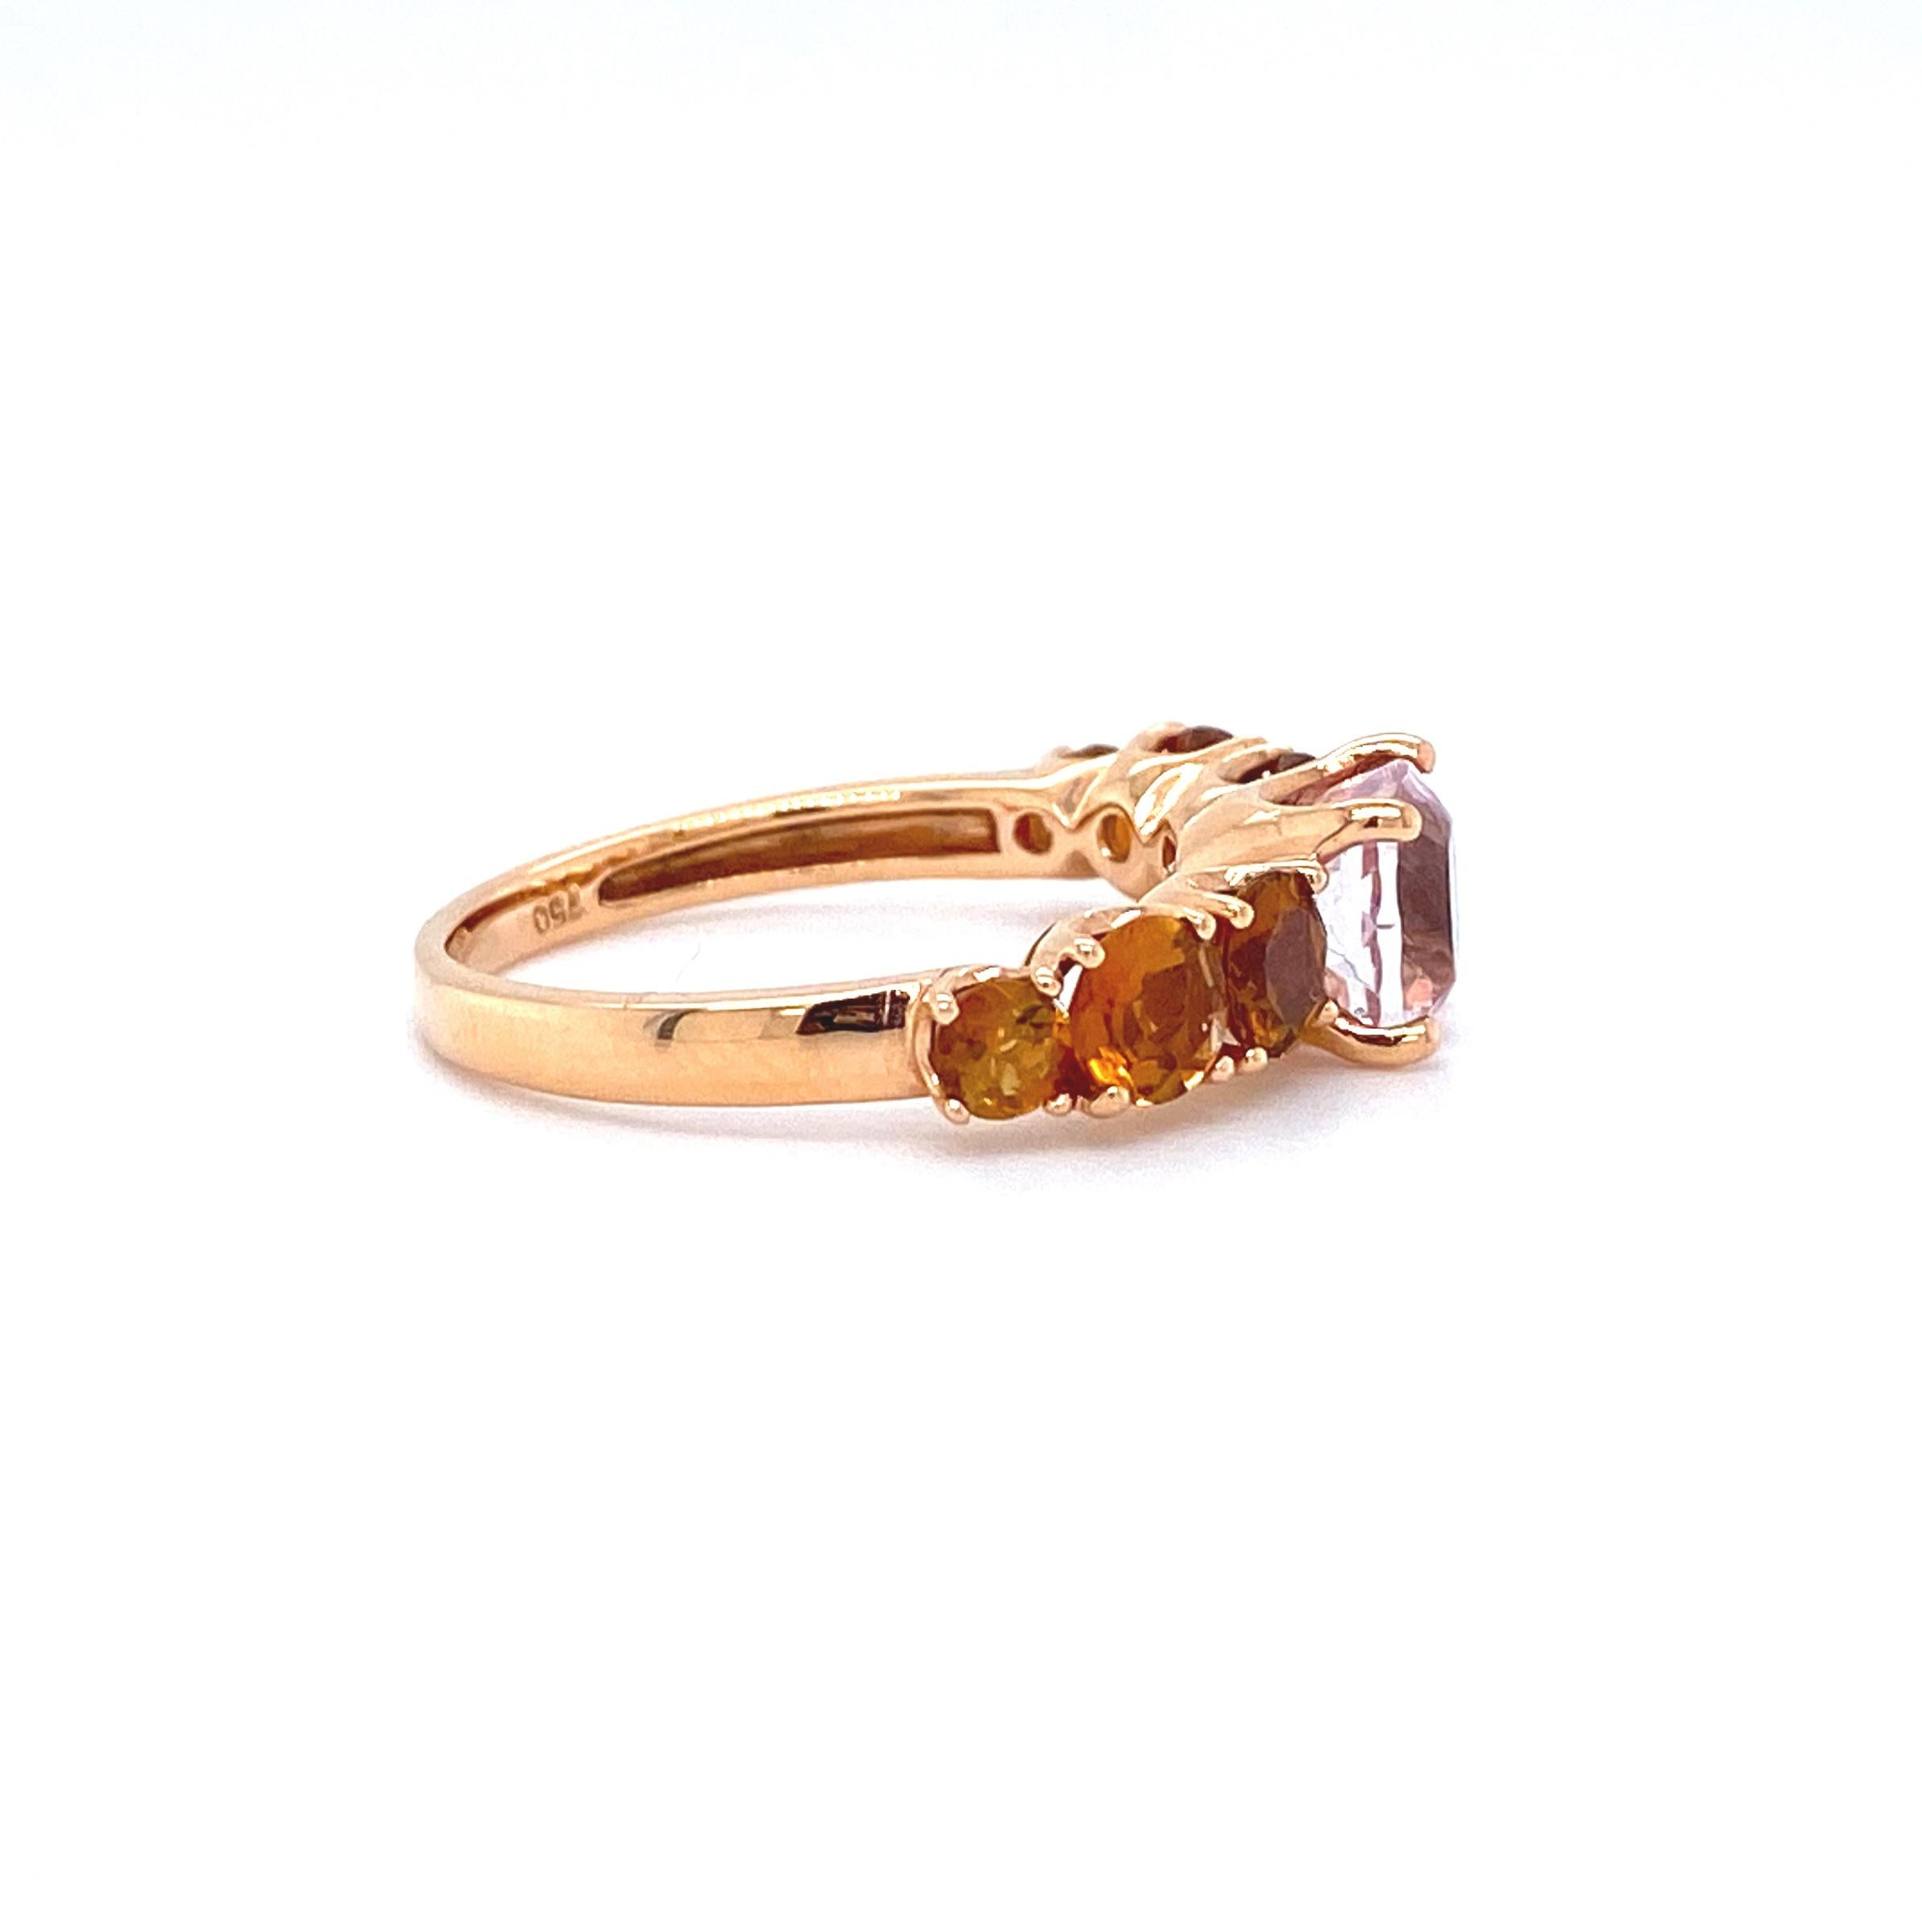 18K yellow gold cocktail ring is from Divine Collection. This elegant ring is created from natural pink tourmaline 2.73 Carat decorated by 6 round natural citrines. Total metal weight is 3.45 gr.

The Divine Collection has a unique blend of history,